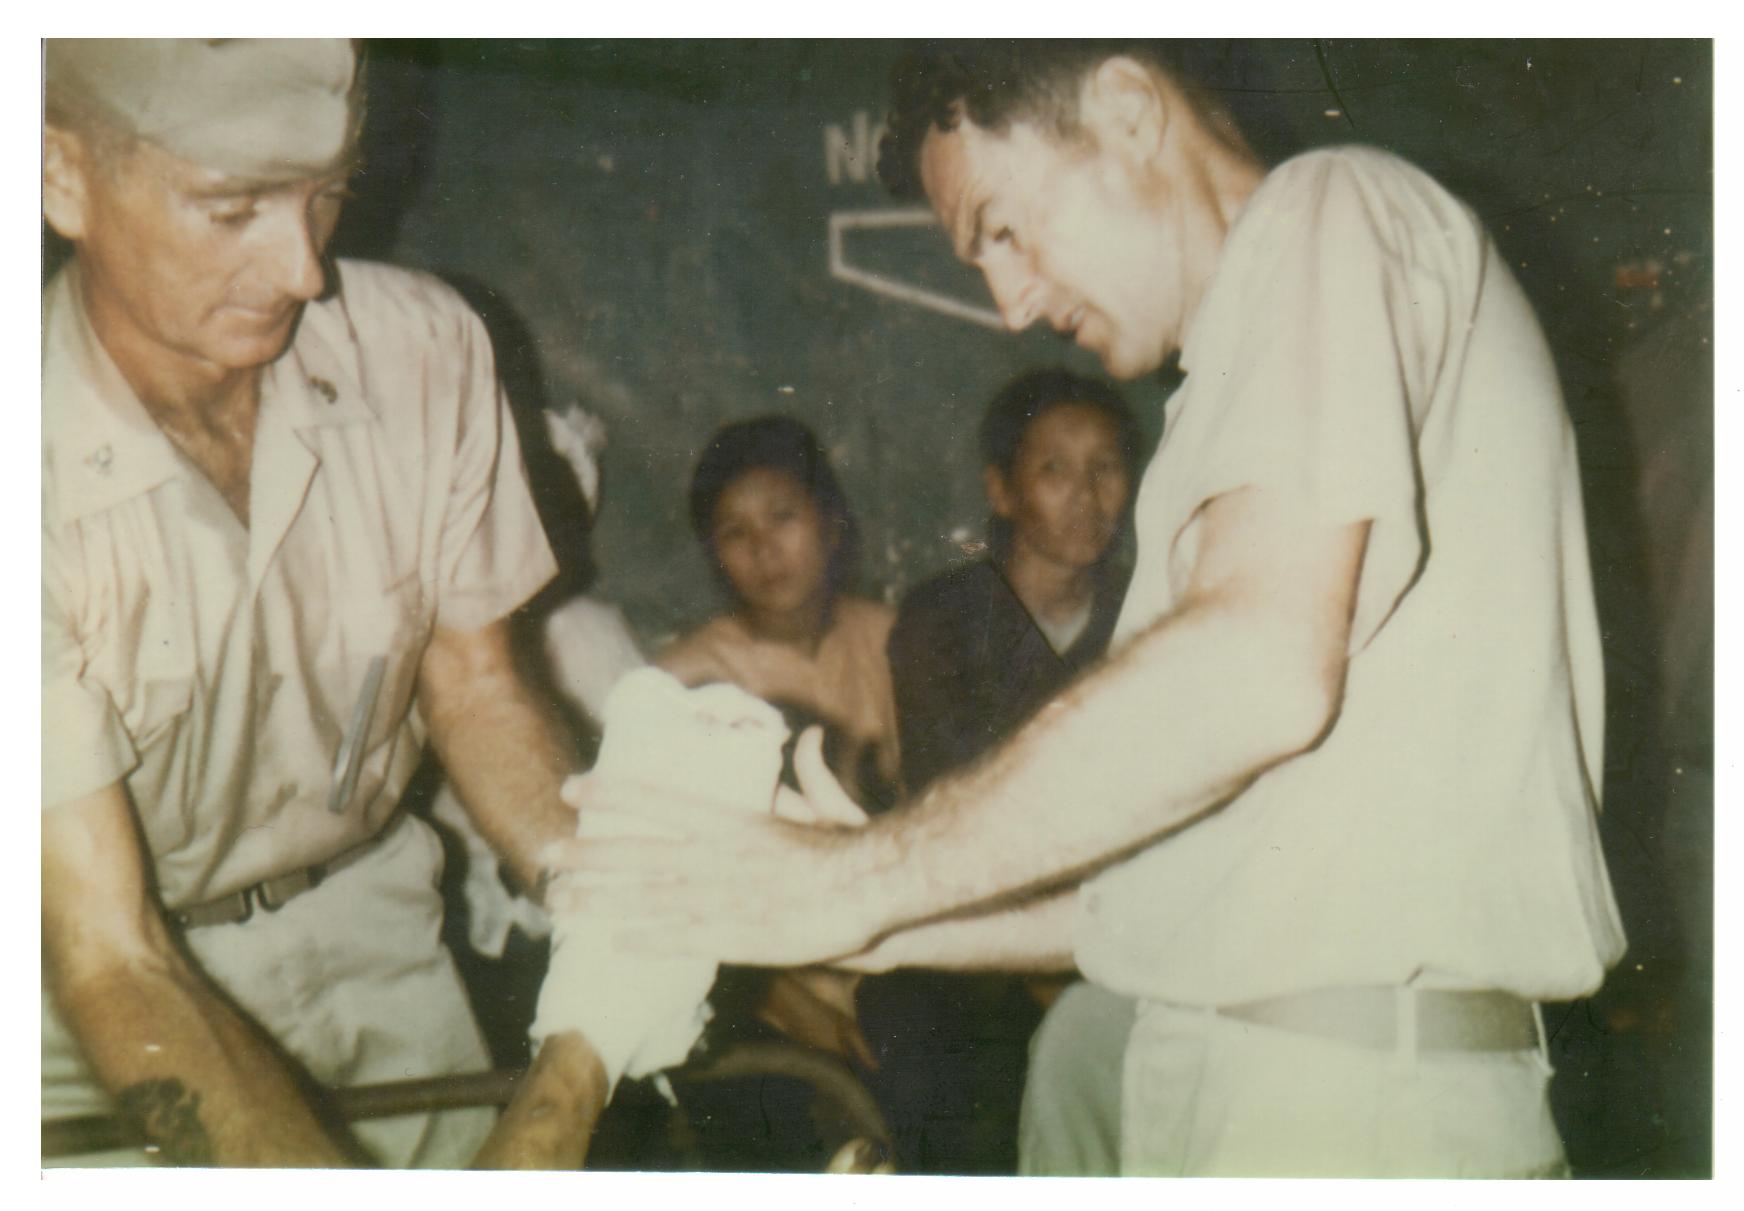 Doc White providing medical care to wounded Vietnamese villagers. (Mrs. Misa White)